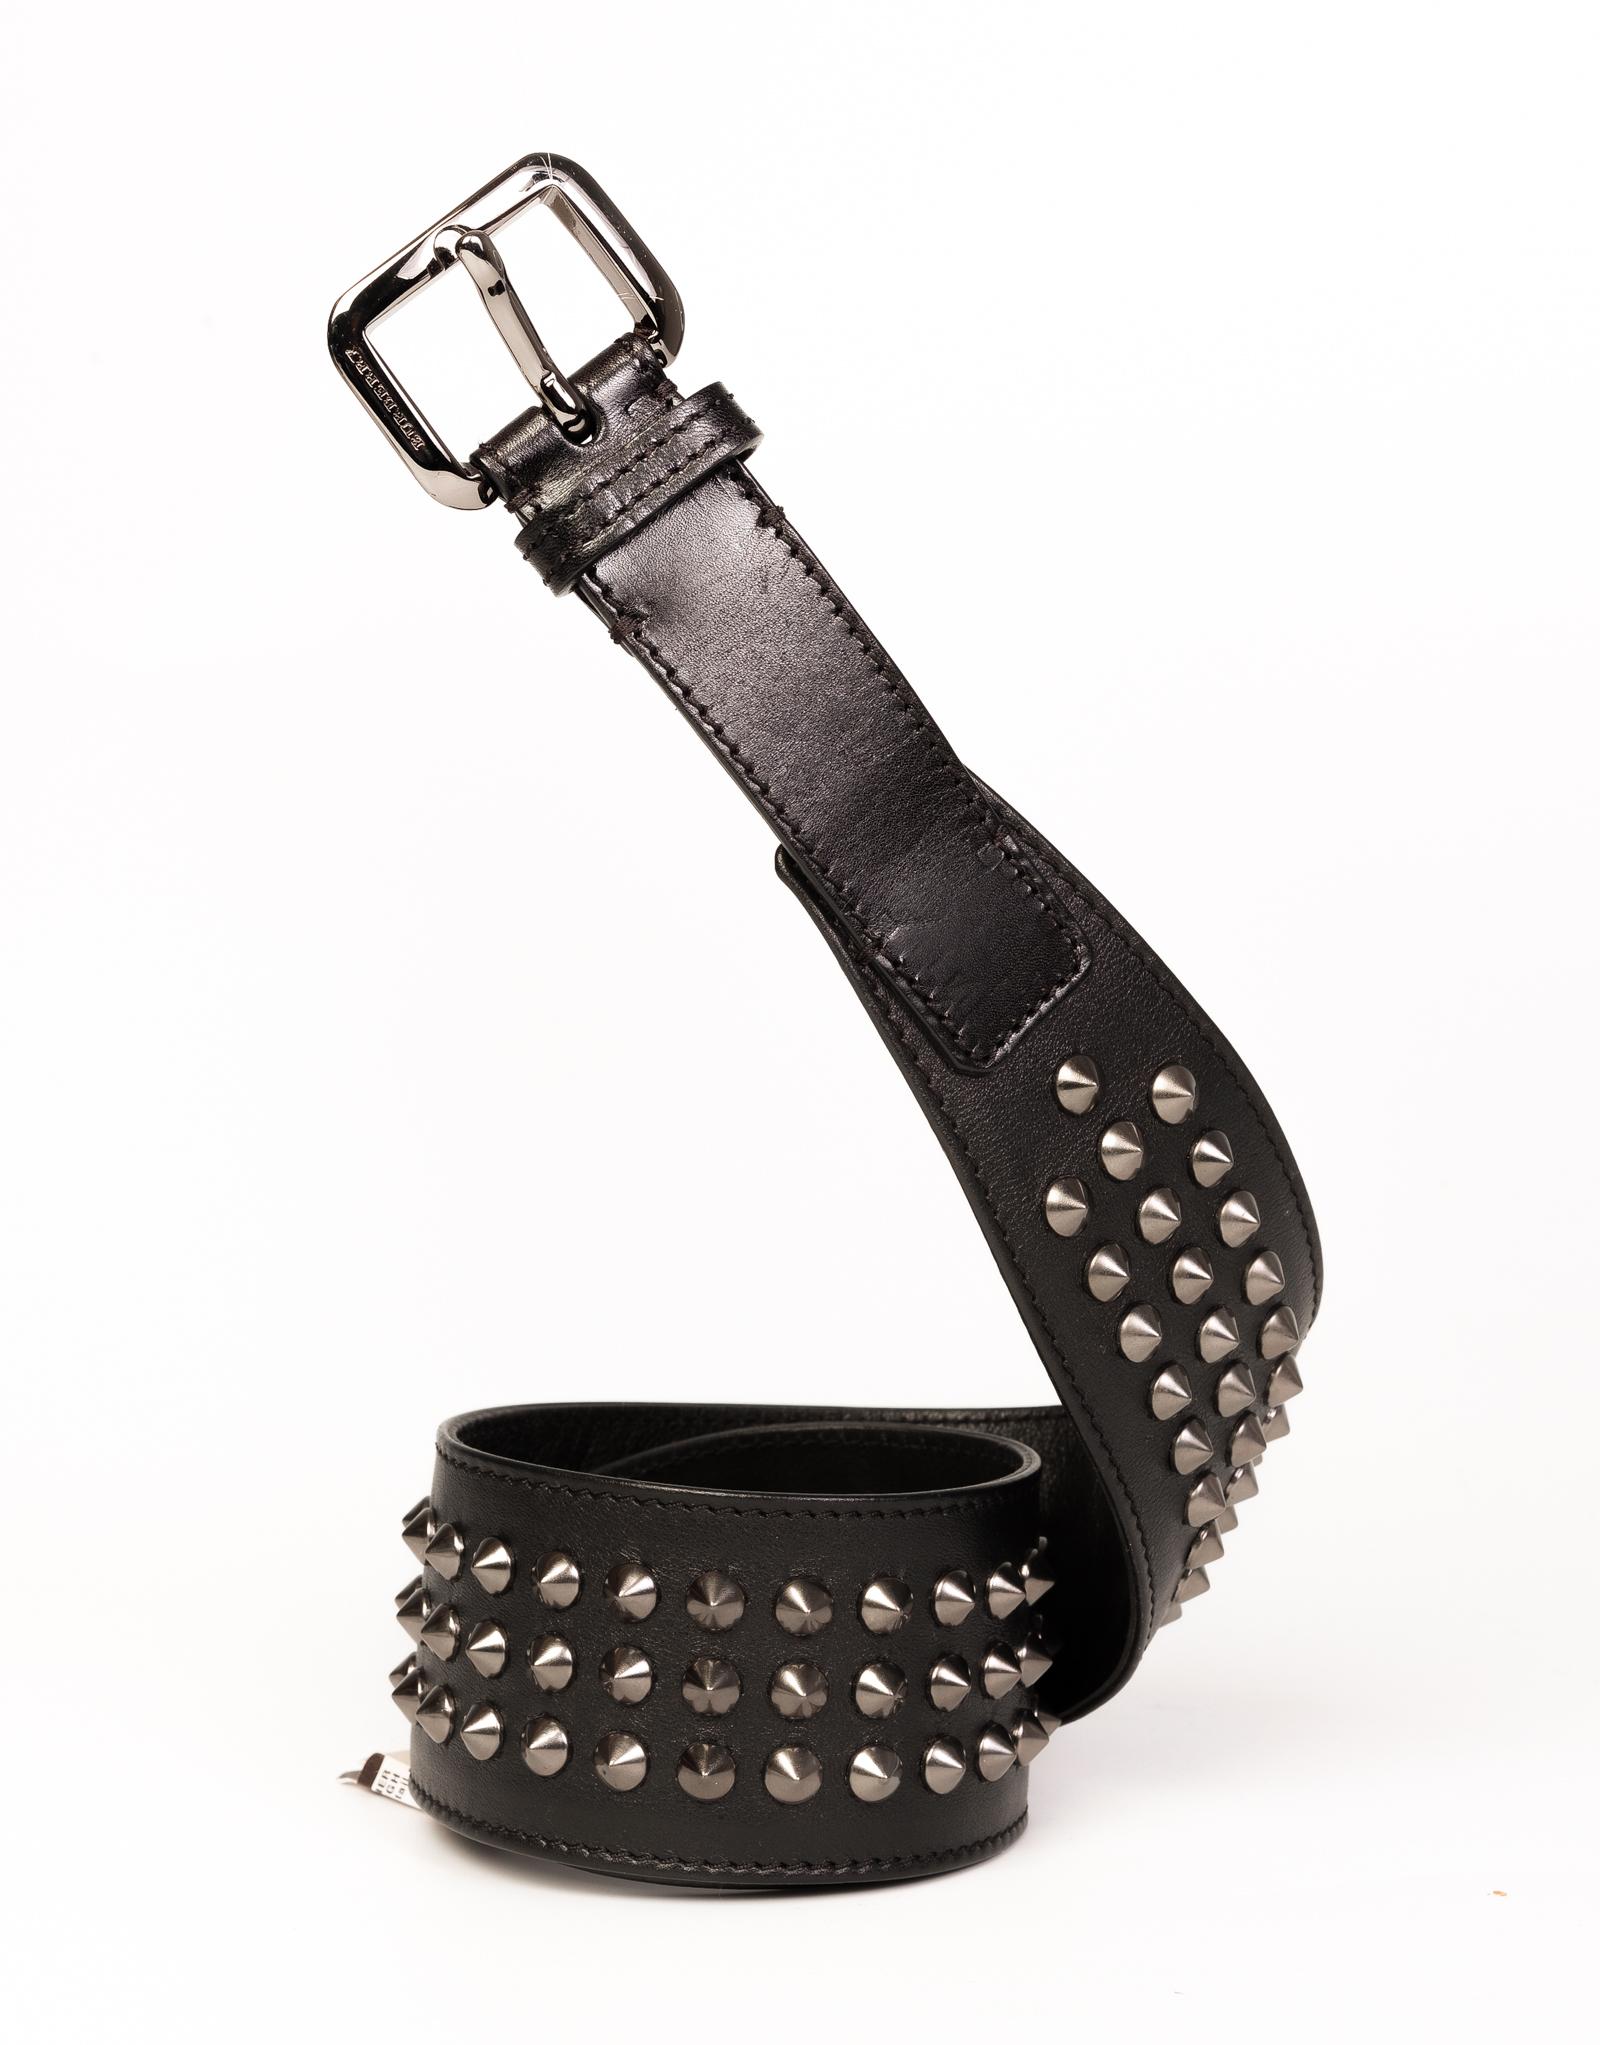 Leather black belt with a grey white and black Burberry pattern, and triple horizontal lines of pointy silver-tone studs.

COLOR: Black
MATERIAL: Leather
ITEM CODE: ITGIOLIN4FIR
MEASURES: L 36” x W 2.25”
SIZE: 80/32
EST. RETAIL: $600
CONDITION: